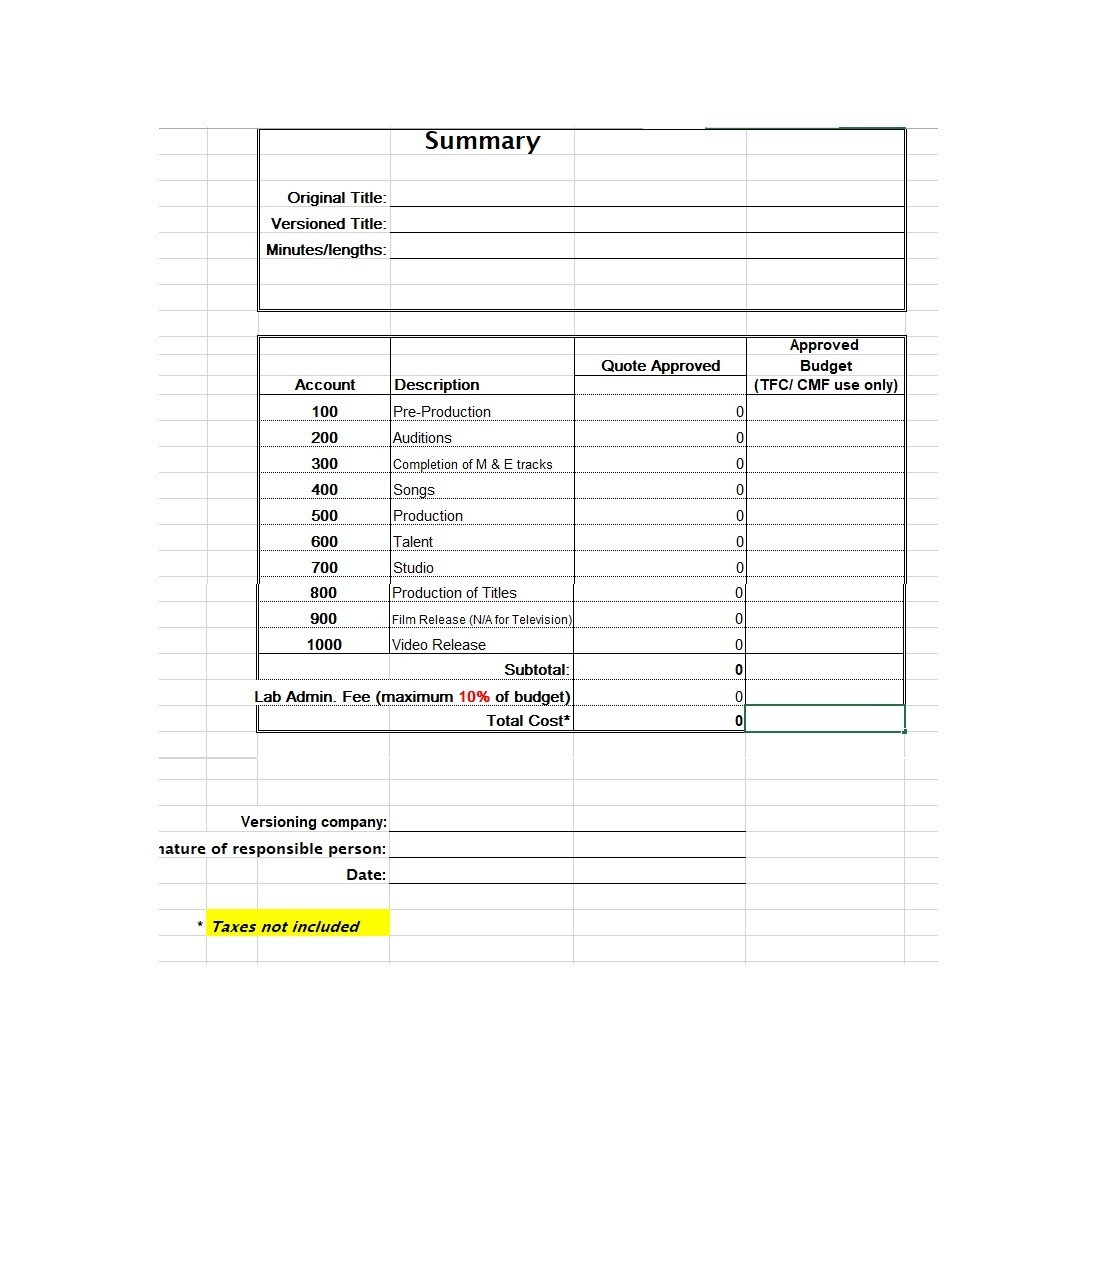 11 Free Film Budget Templates (Excel, Word) ᐅ TemplateLab Pertaining To Independent Film Budget Template With Independent Film Budget Template